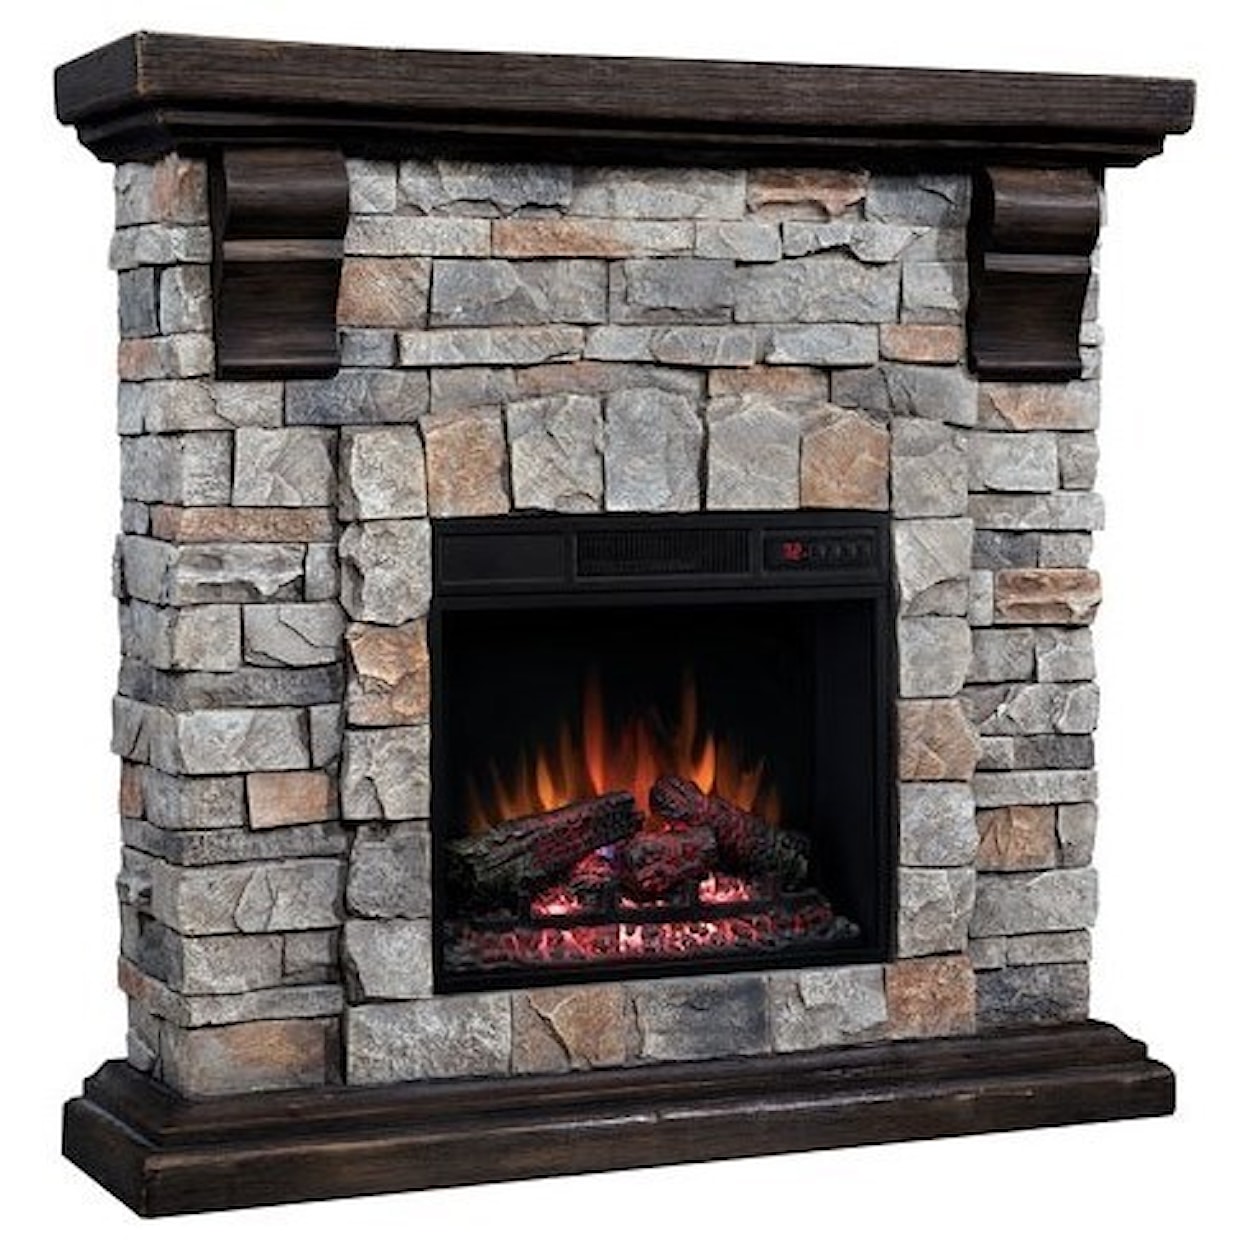 ClassicFlame Pioneer 40" Media Mantel with Electric Insert